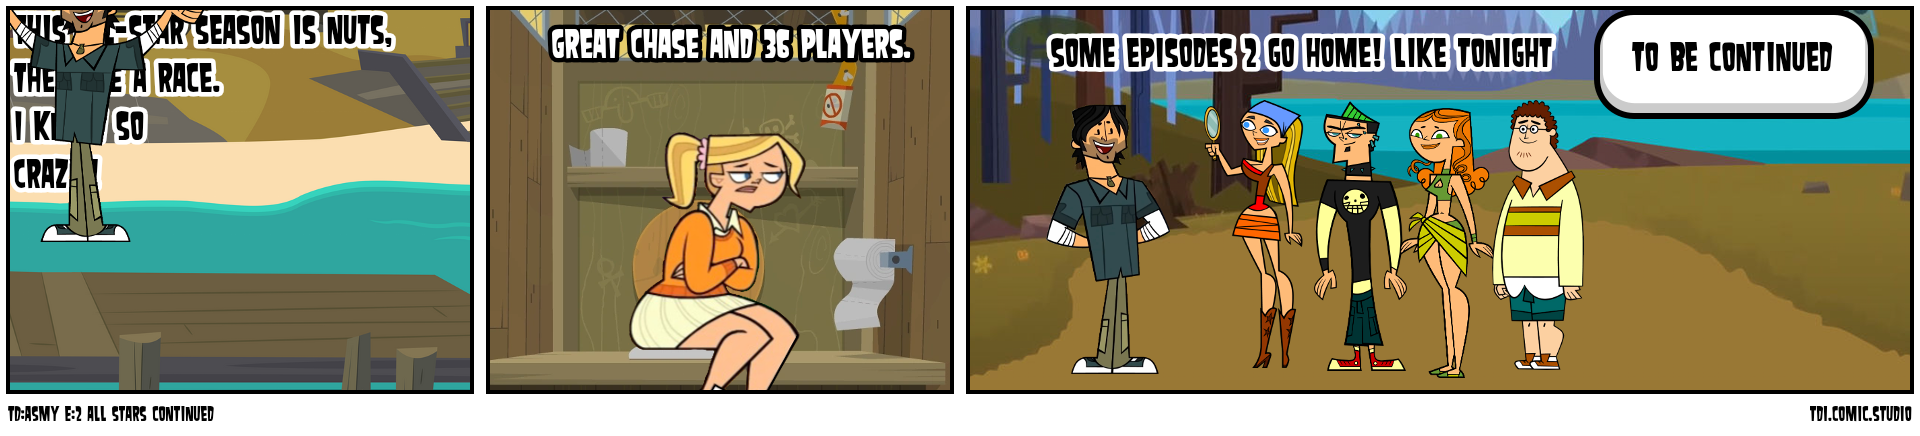 Emma they were the og (website: tdi.comic.studio)#to#totaldramay